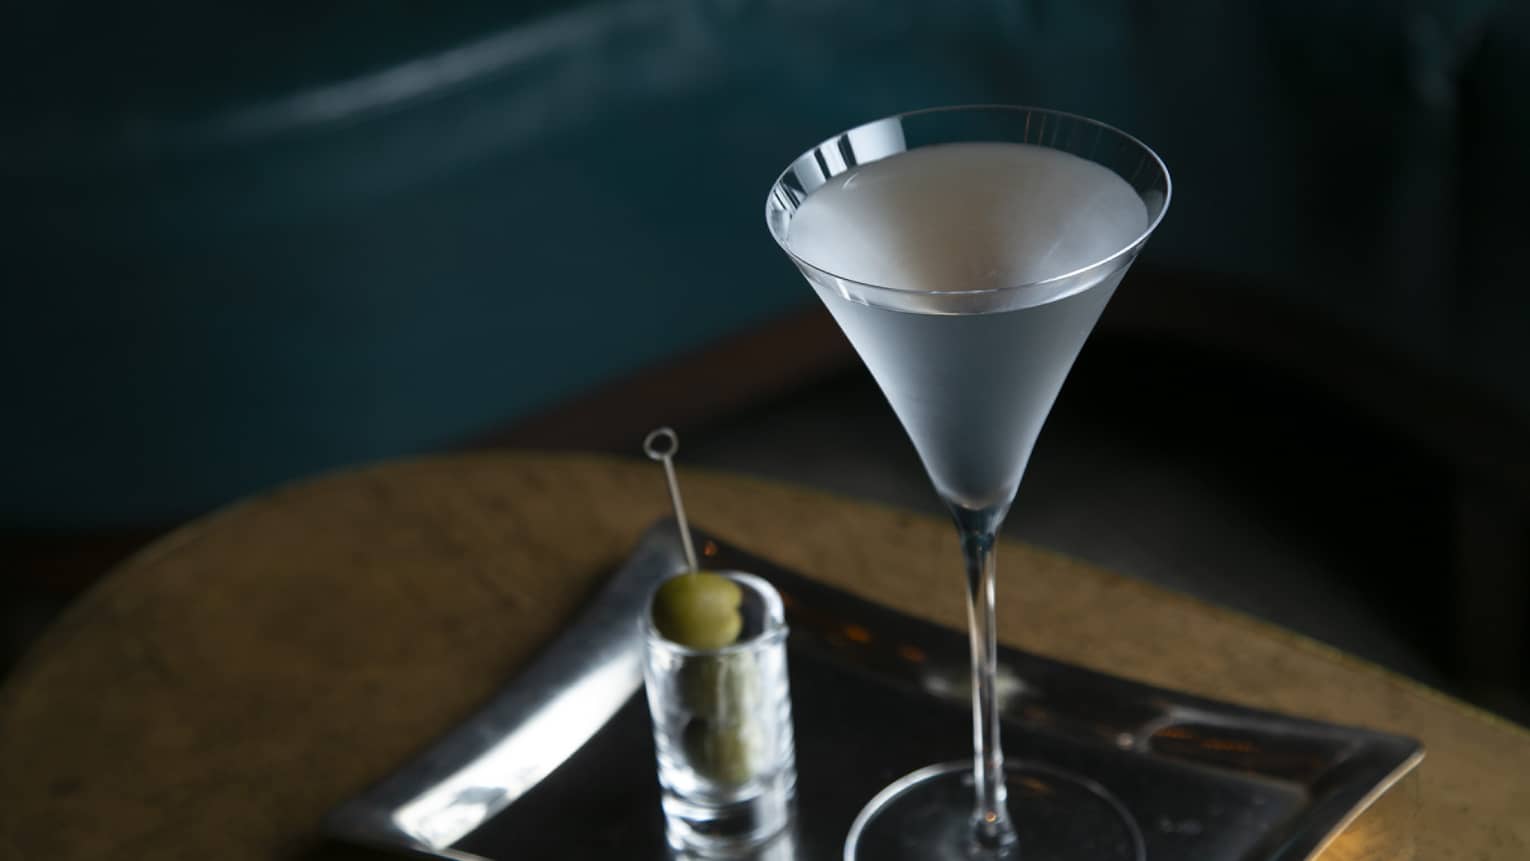 Signature cocktail in stemmed glass on silver tray, skewer of olives